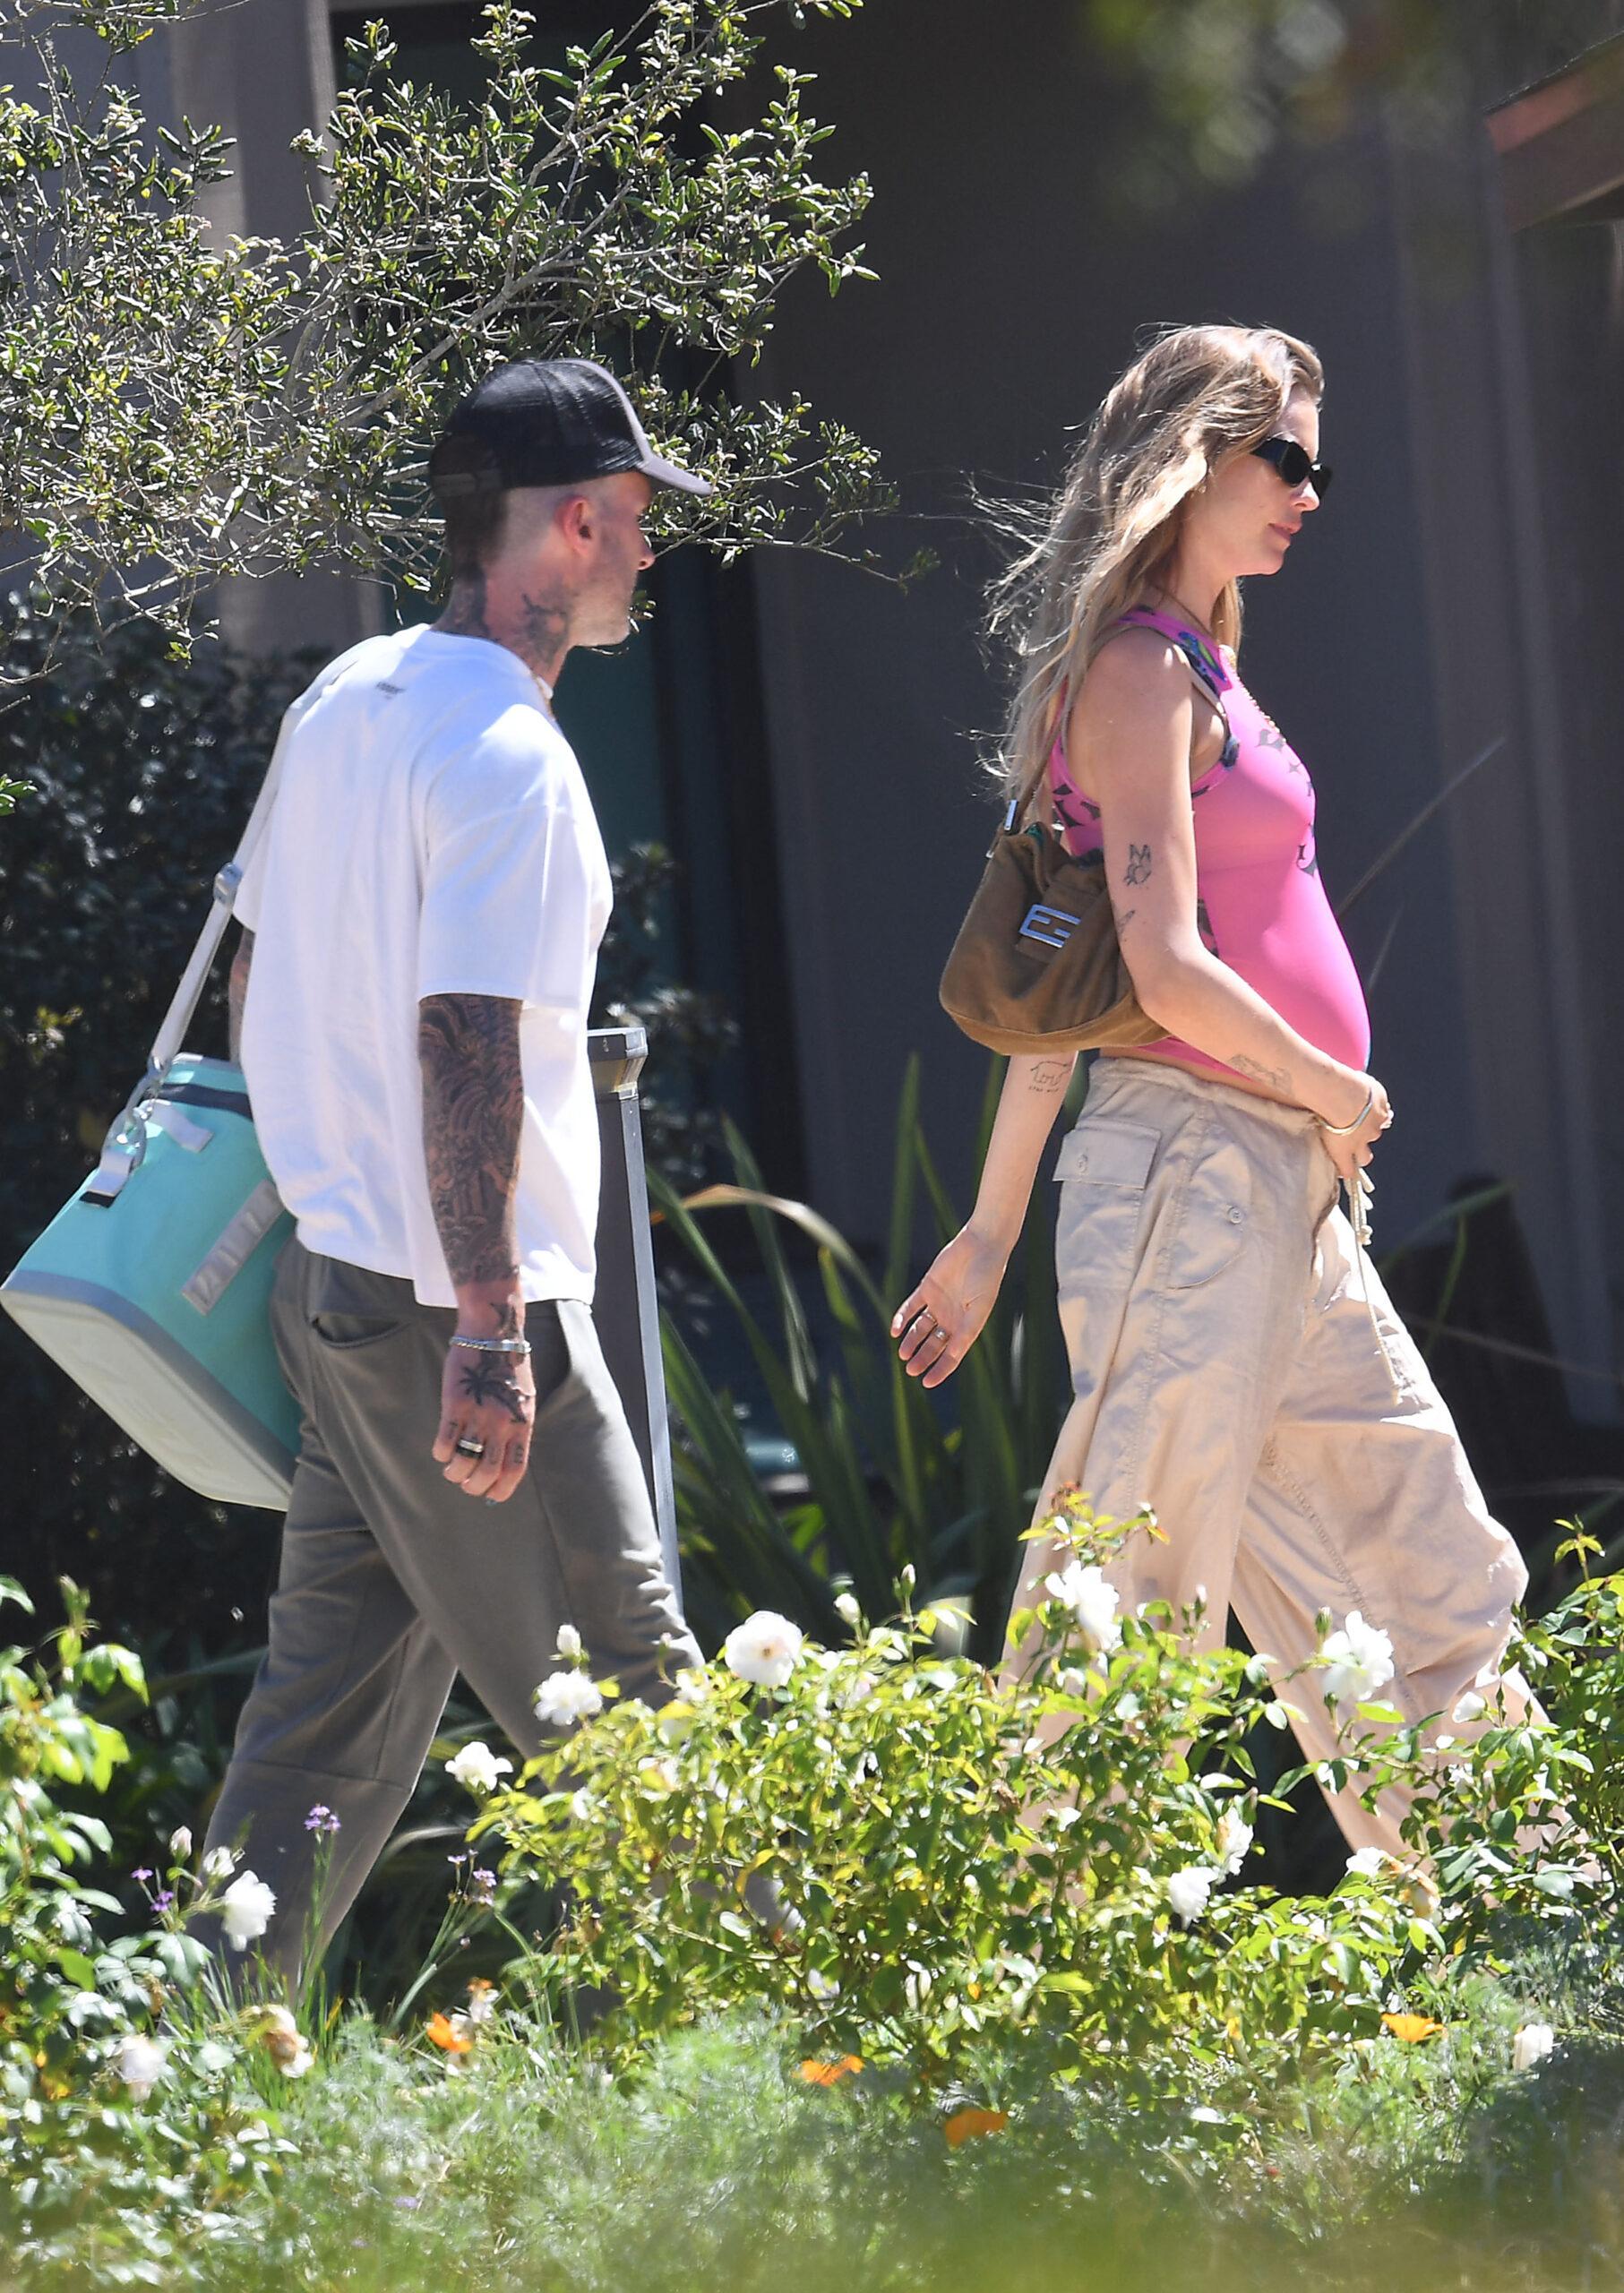 Adam Levine and pregnant wife Behati Prinsloo are seen out in Santa Barbara after a 23 year old model claimed she had an affair with the singer and other women come forward claiming he sent flirty messages.